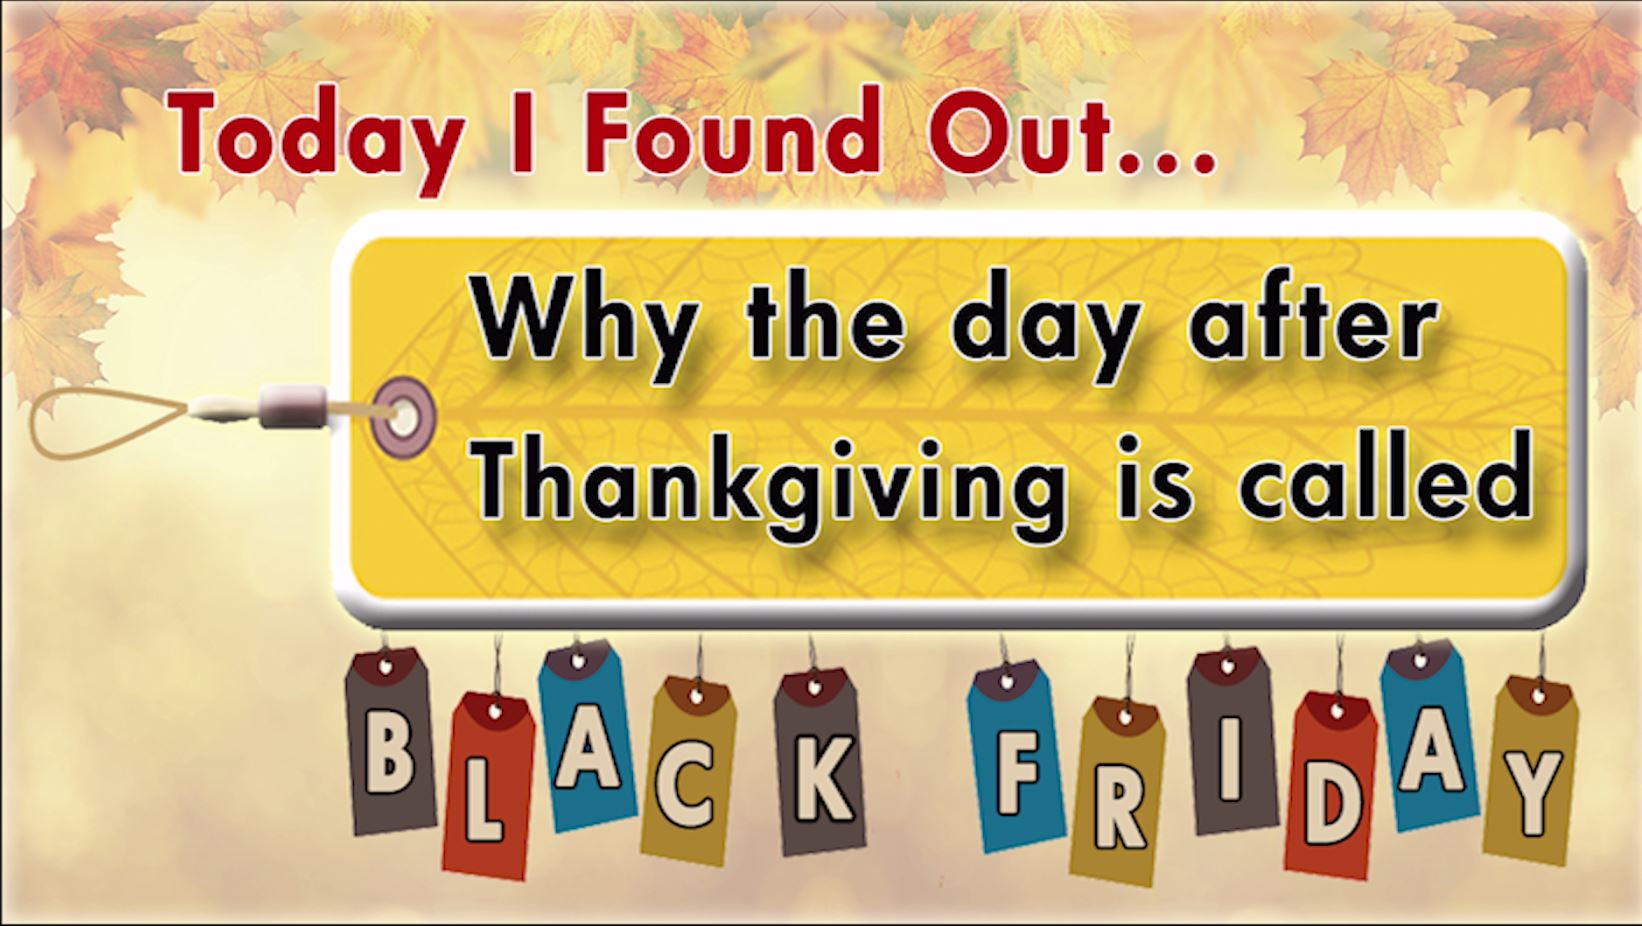 Why the Day After Thanksgiving is Called "Black Friday" - Why Do Black Friday Deals Suck